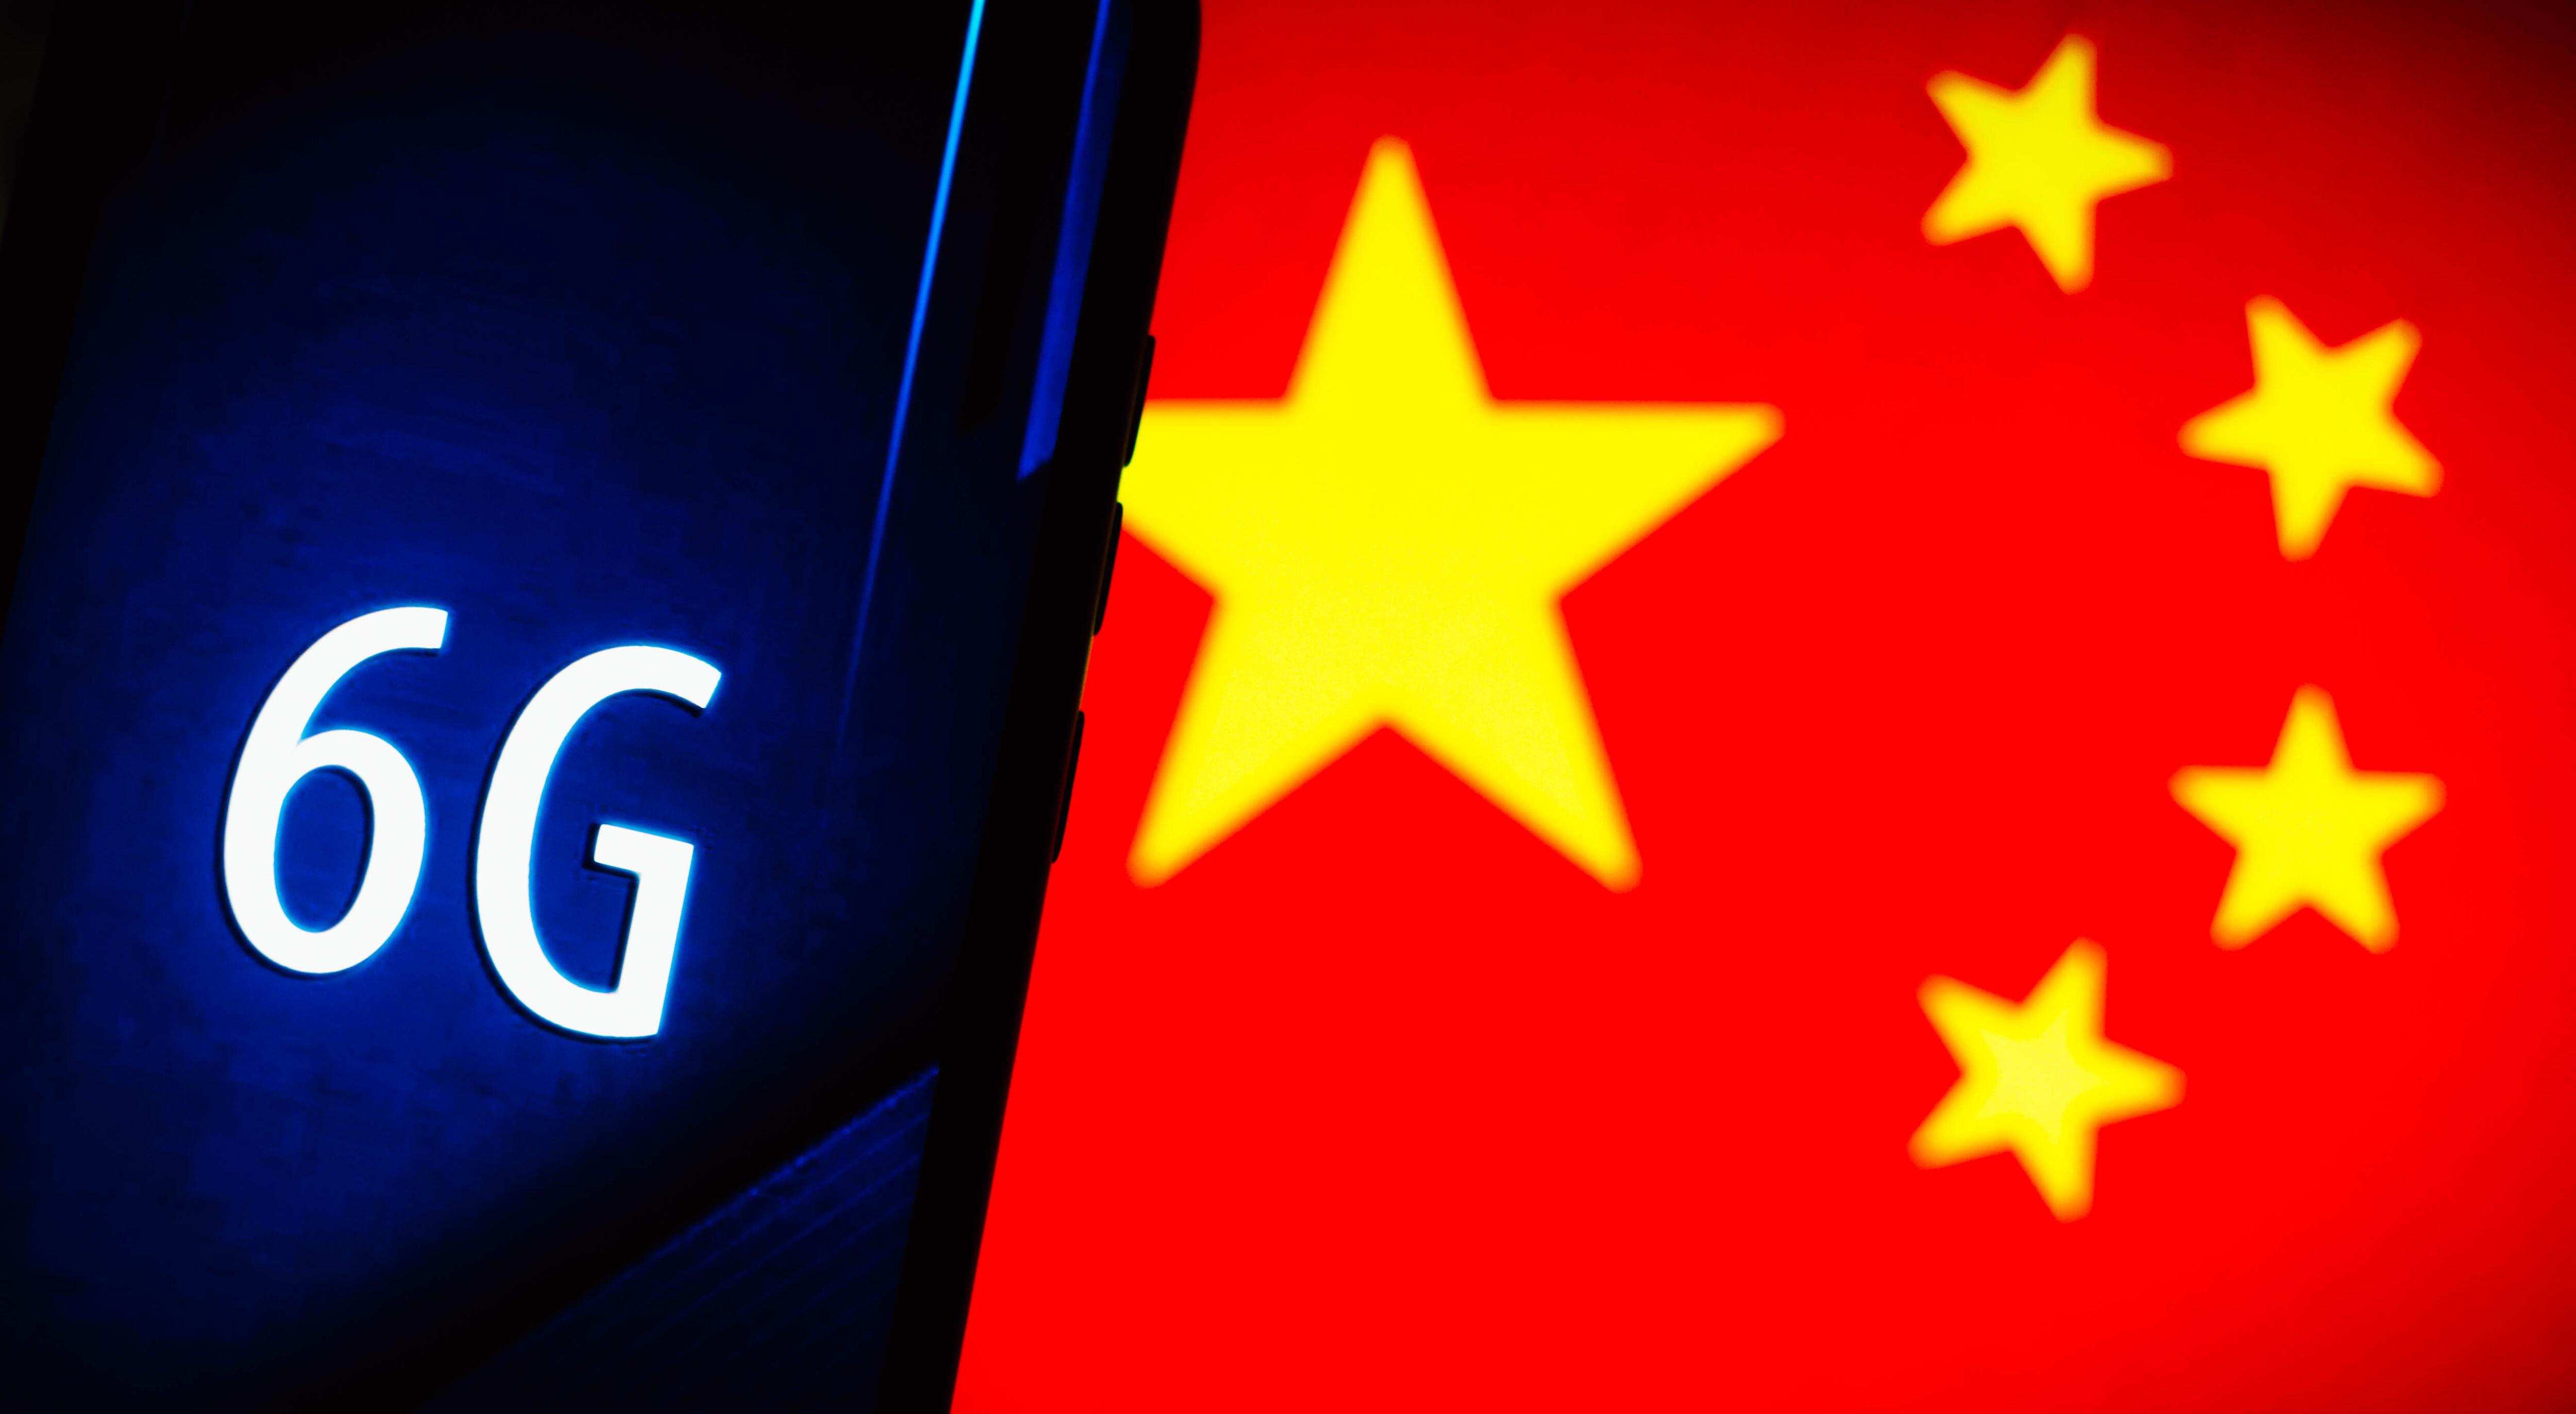 China looks set to increase technology’s share of GDP by 2025 through 6G, big data